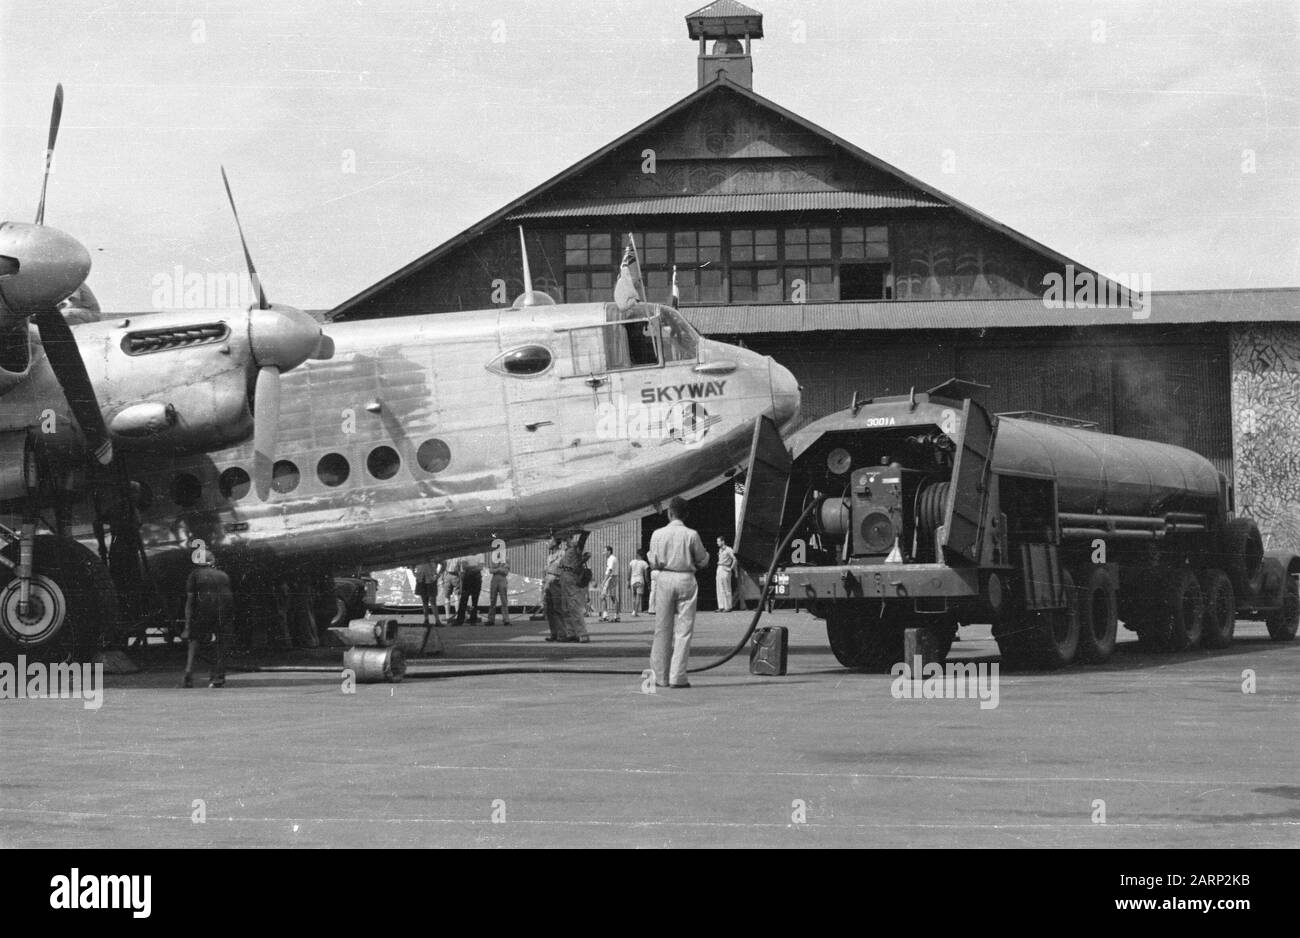 [a four-engine aircraft of Skyway has landed and is on the platform of an airport. Flags are stuck out of the cockpit. A tank car refuel] Date: June 1947 Location: Indonesia, Dutch East Indies Stock Photo